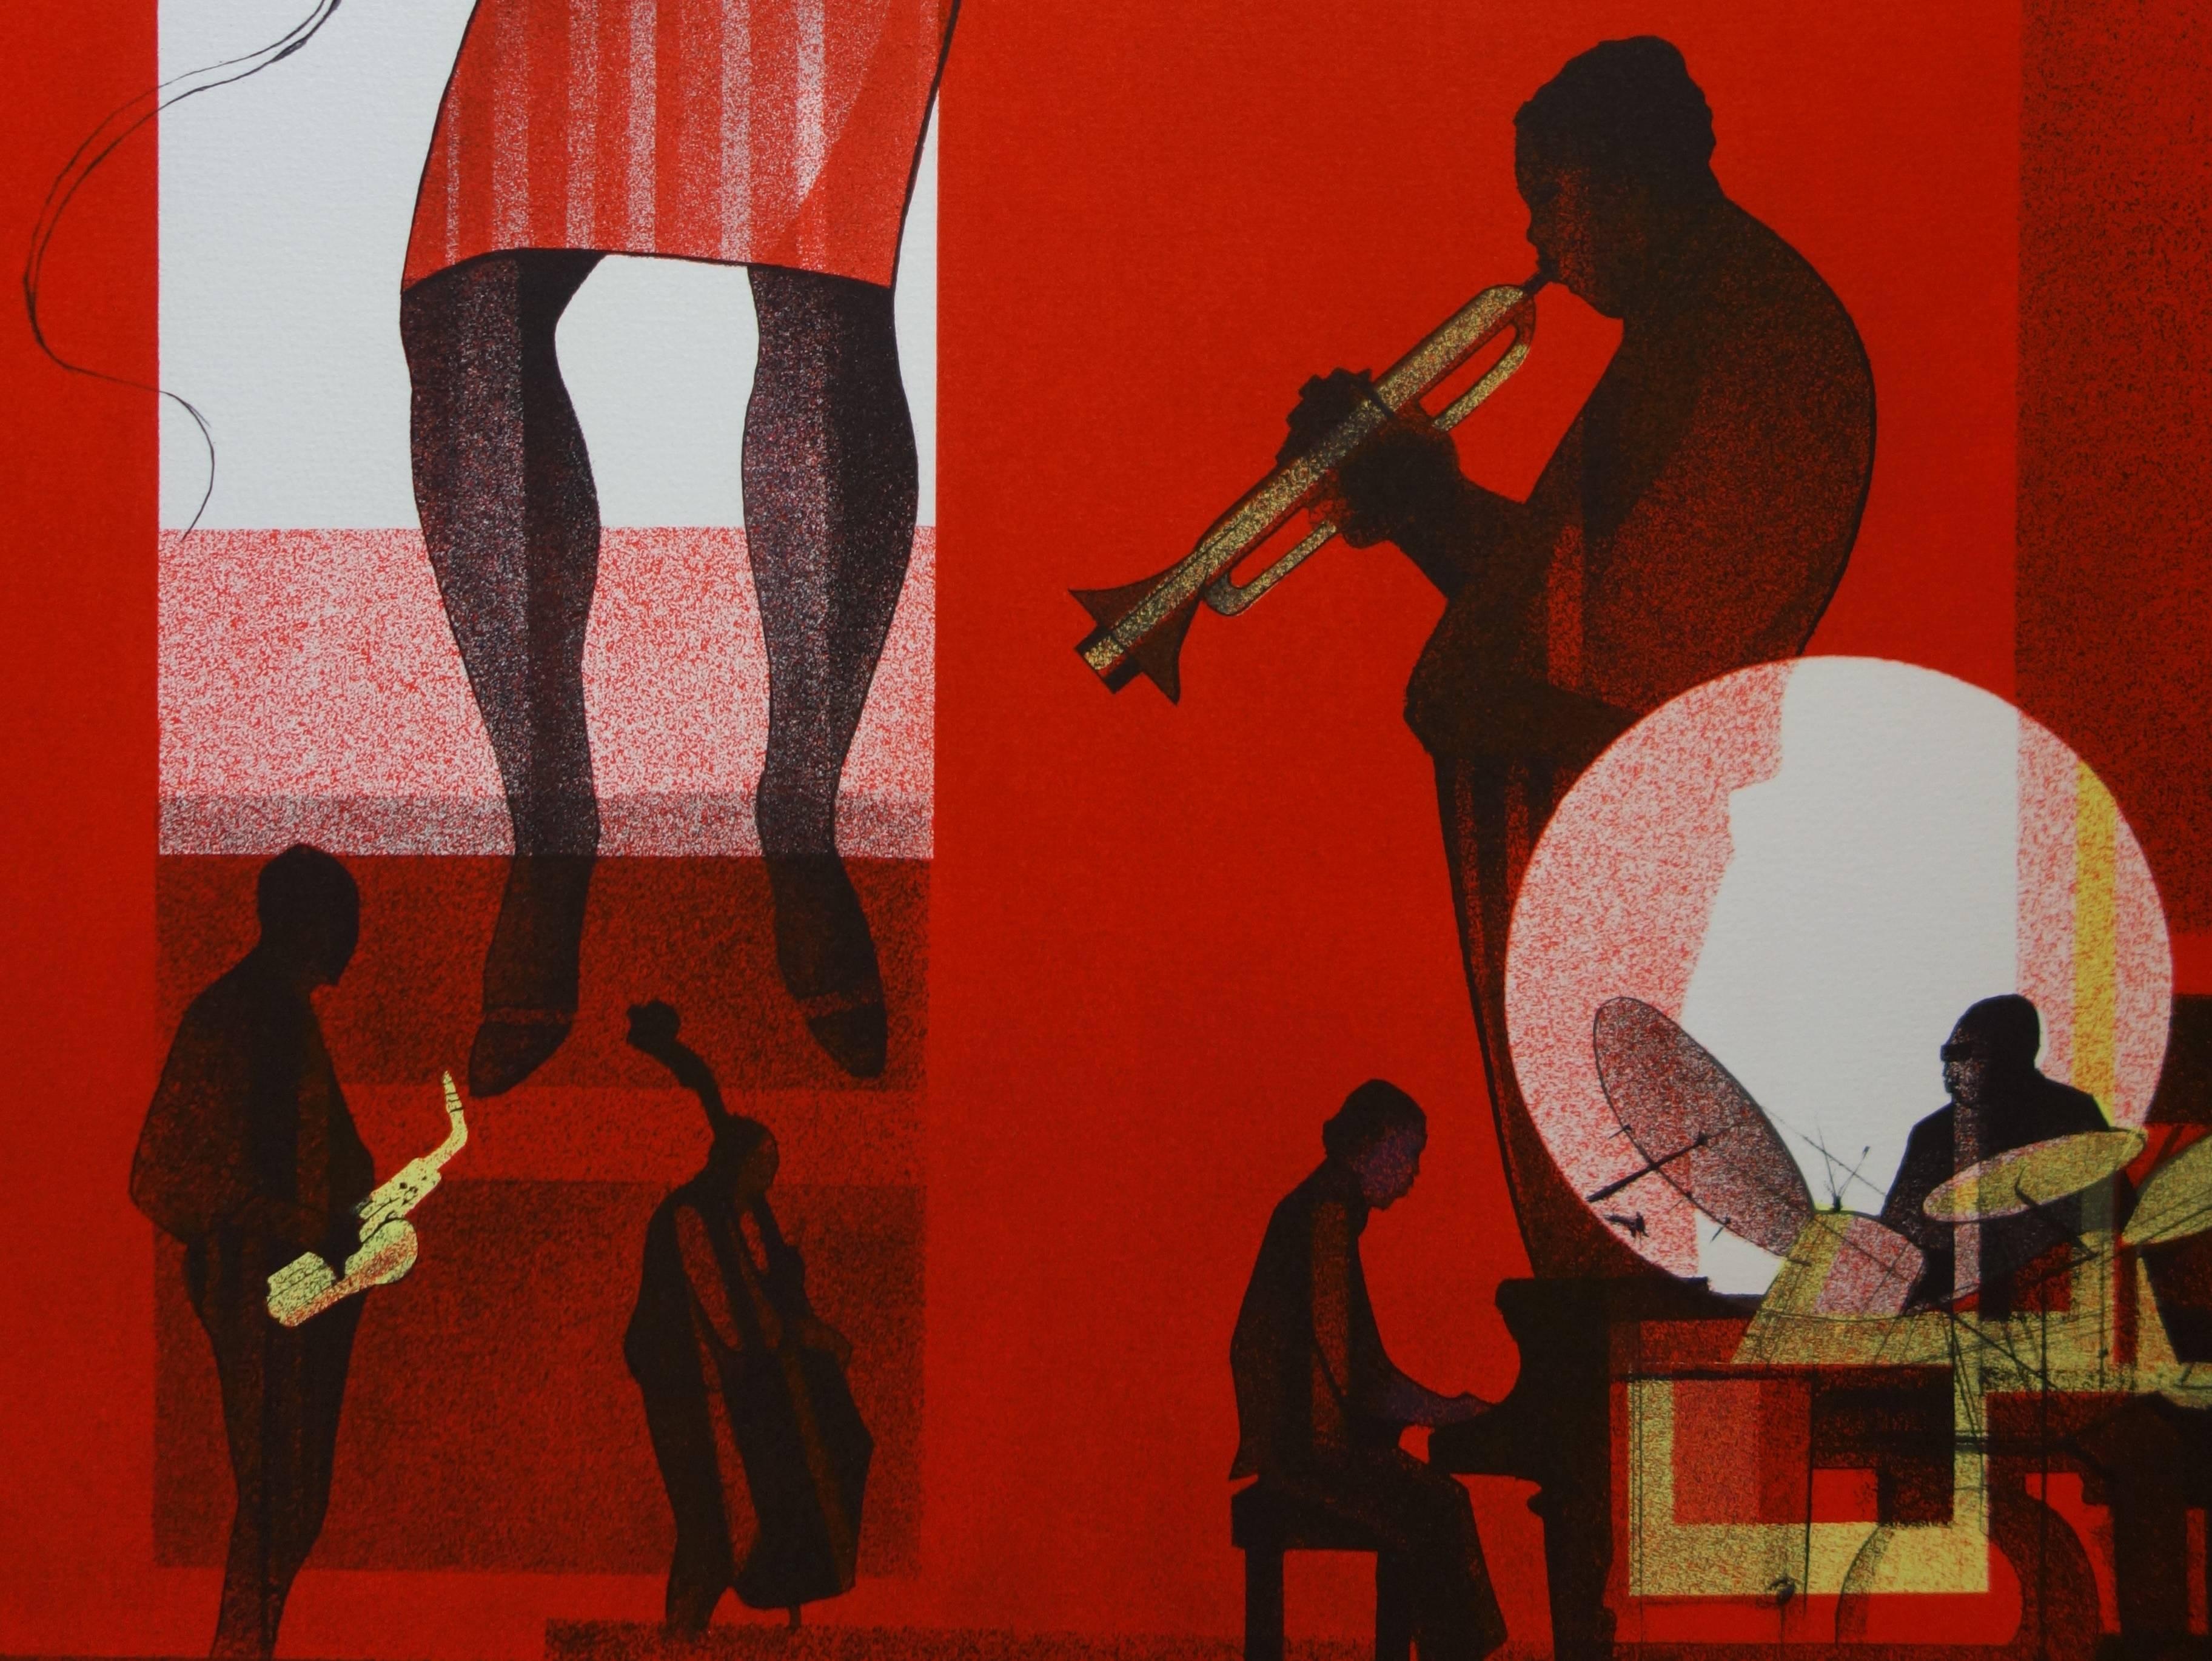 Jazz : Hot Swing- Original handsigned lithograph - 275ex - Red Figurative Print by Sacha Chimkevitch